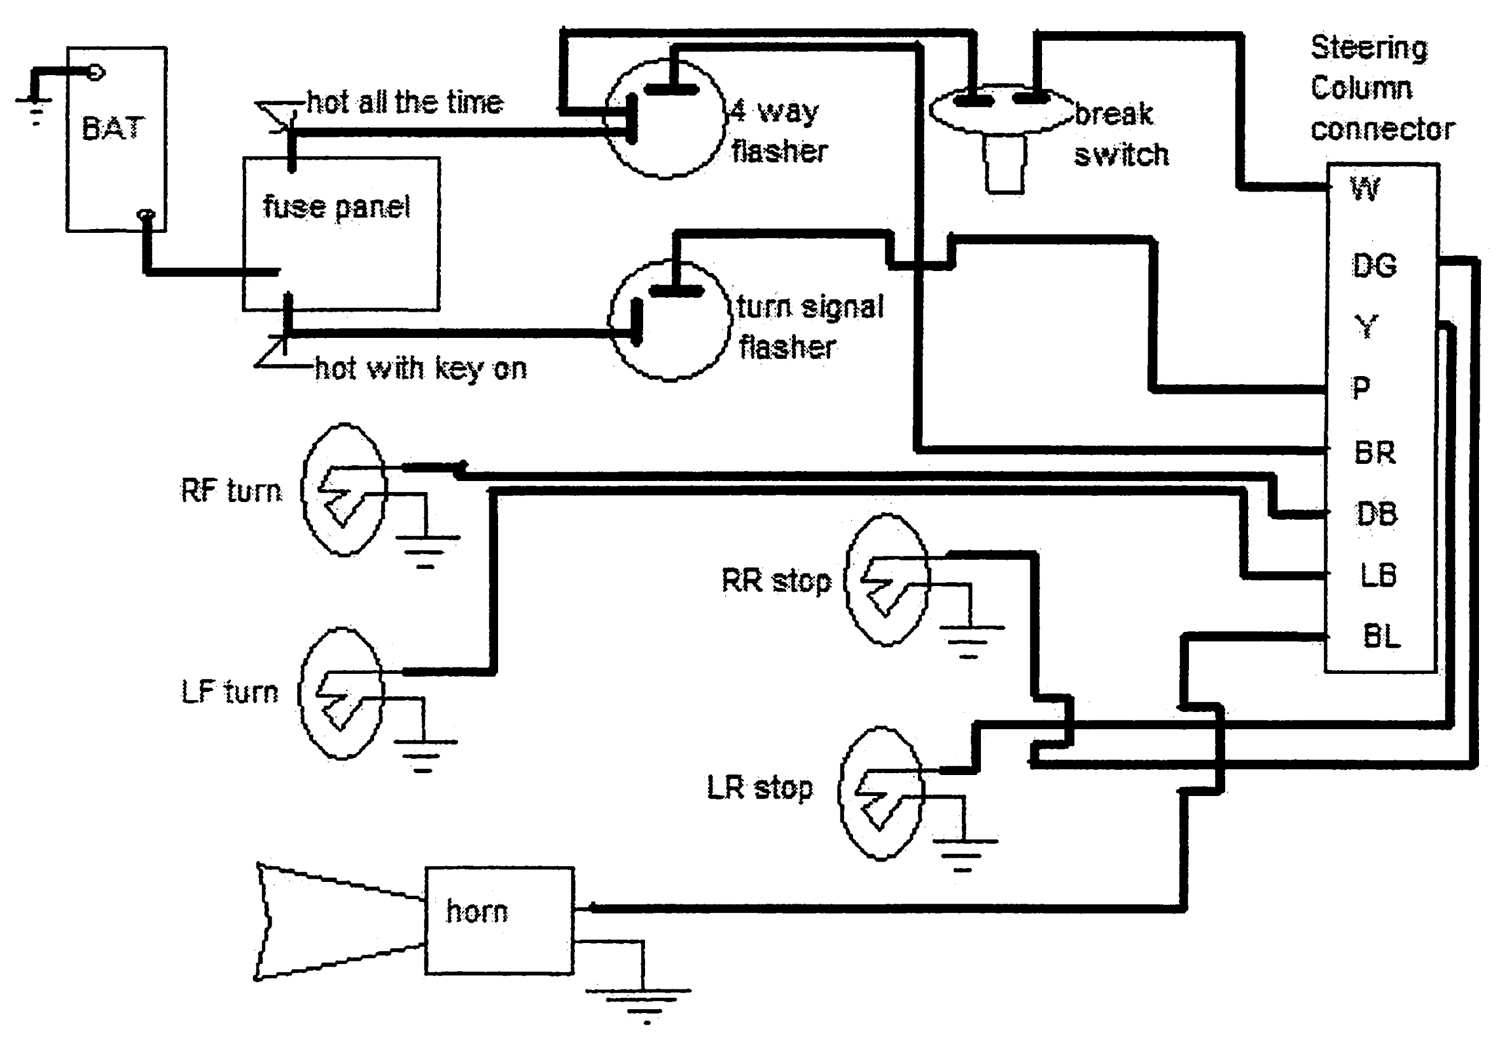 1967 Mustang Turn Signal Switch Wiring Diagram from www.ididitinc.com